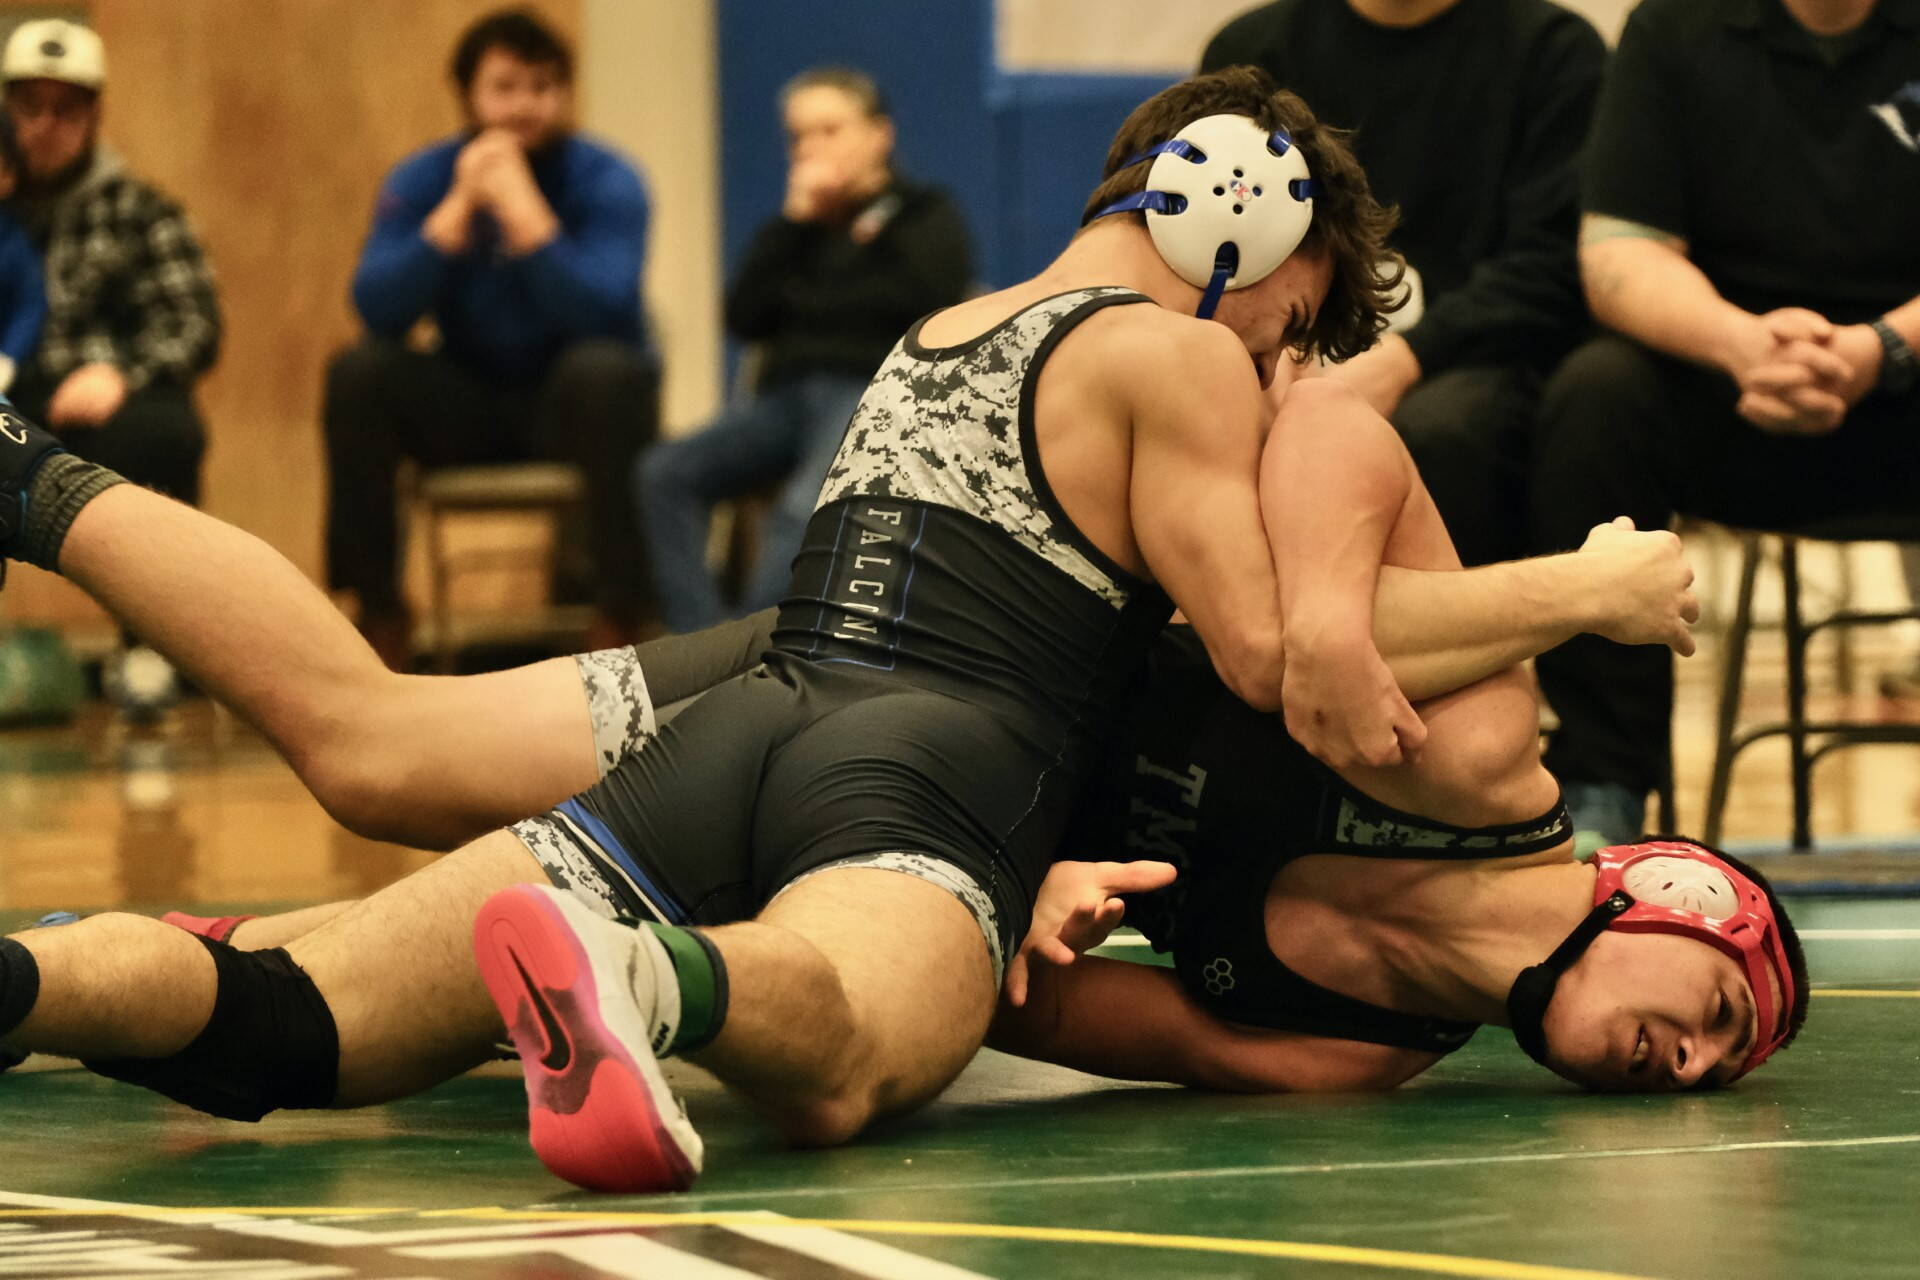 Thunder Mountain High School junior Justus Darbonne works to turn TMHS sophomore Alex Marx-Beierly in the 152-pound Division I championship match of the 2023 ASAA Region V wrestling tournament Saturday at TMHS. Darbonne won by 12-1 major decision. (Klas Stolpe/ For the Juneau Empire)